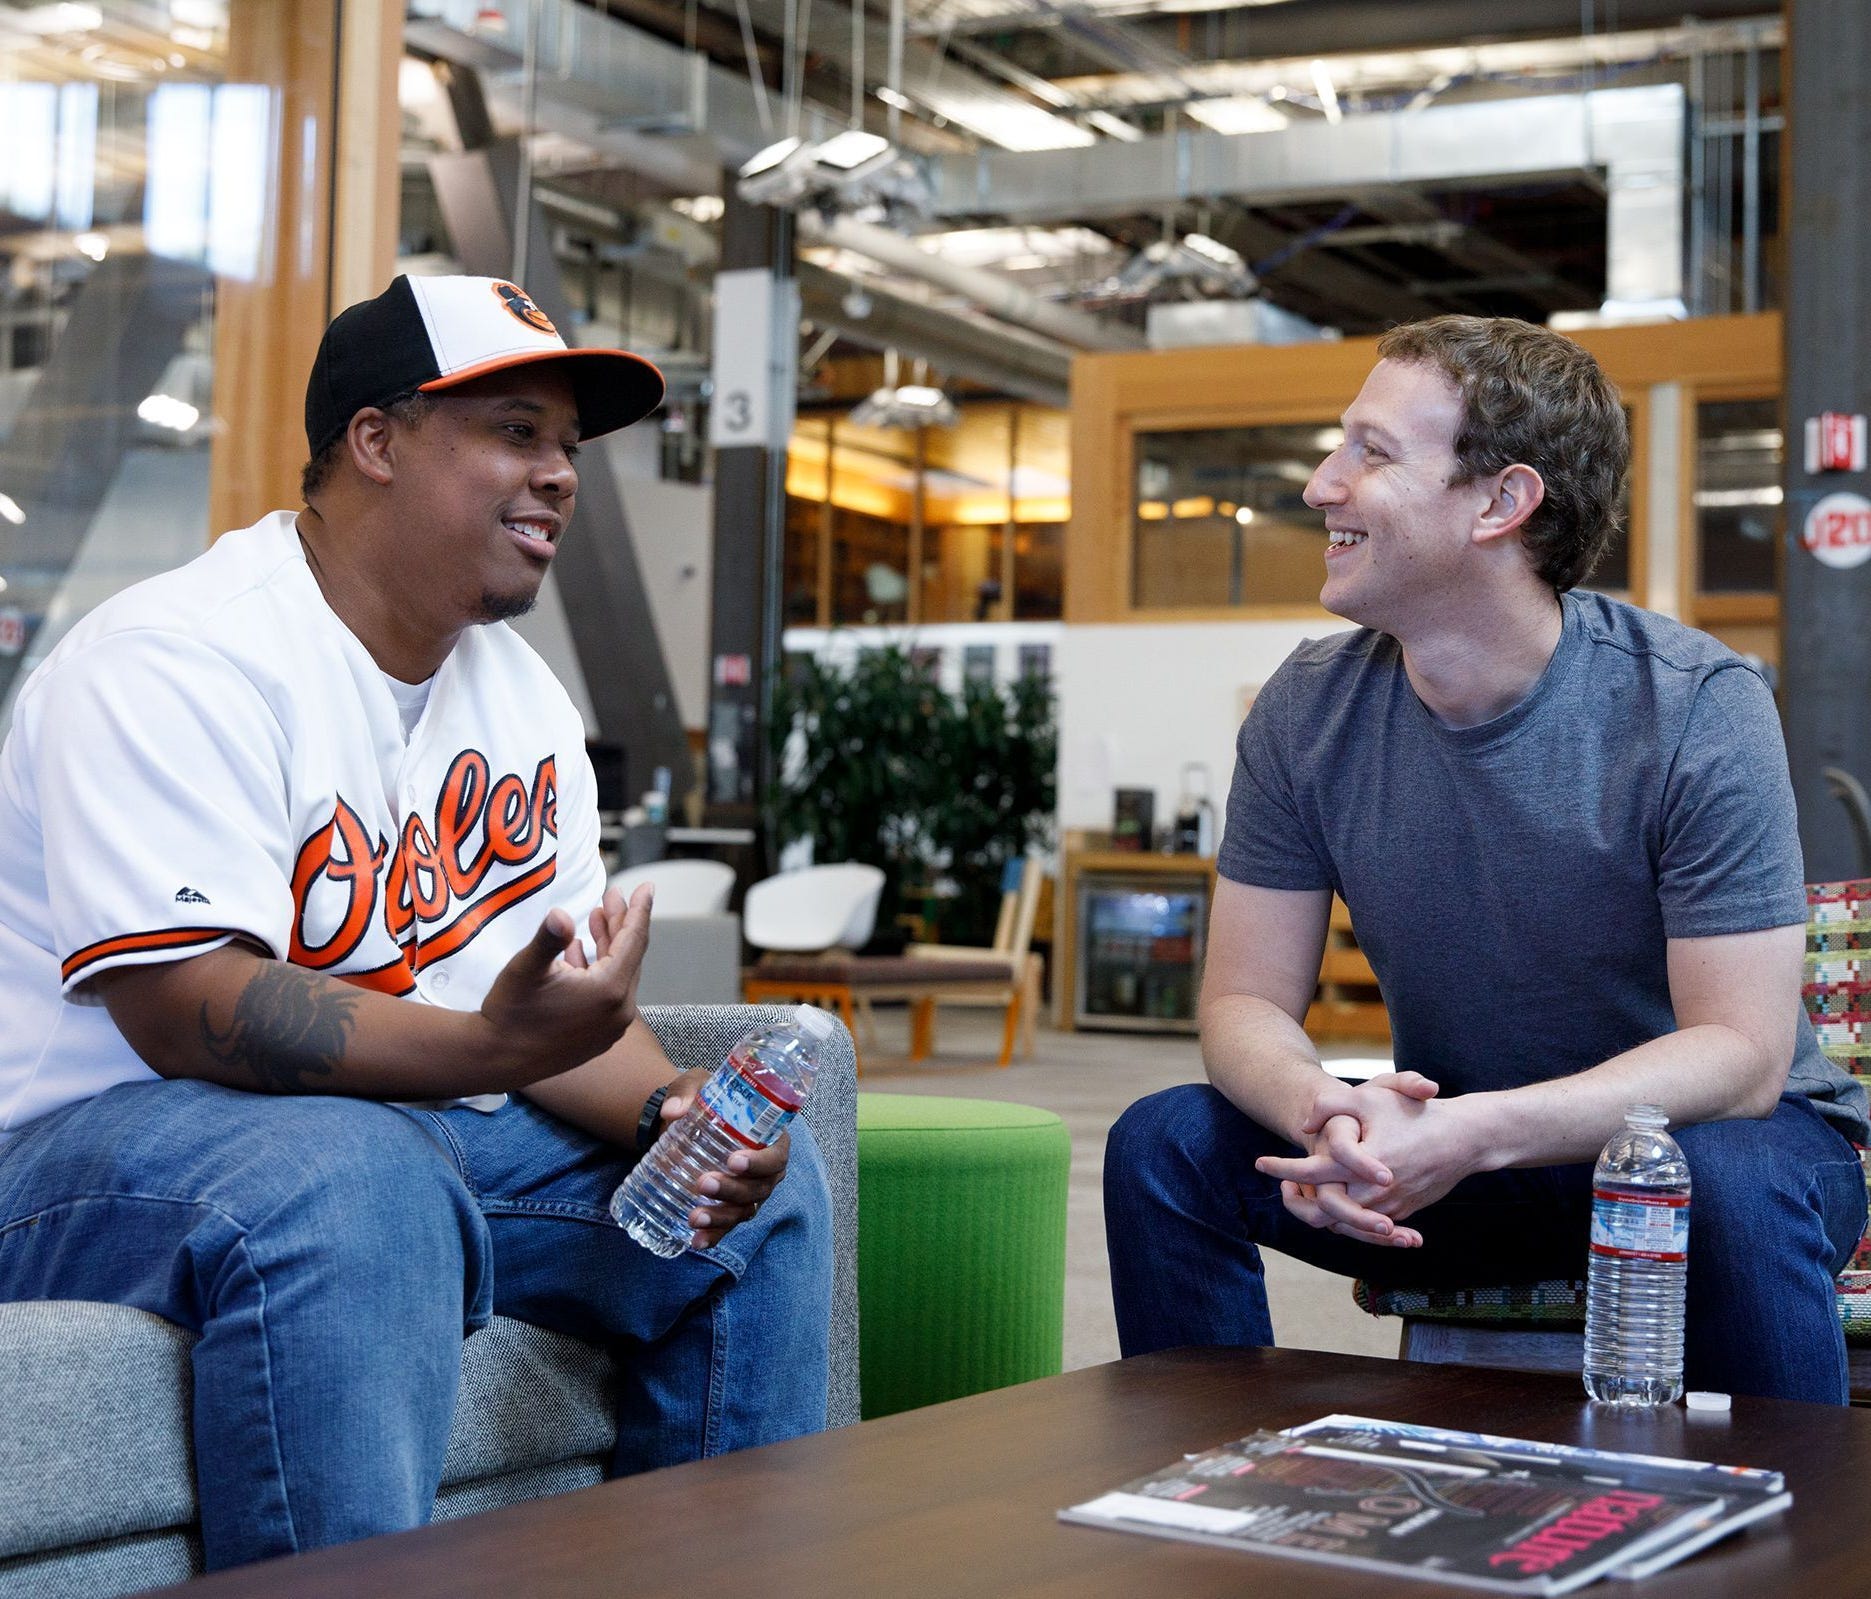 Facebook CEO Mark Zuckerberg meeting with Matt Prestbury, the administrator of a closed Facebook group called Black Fathers.